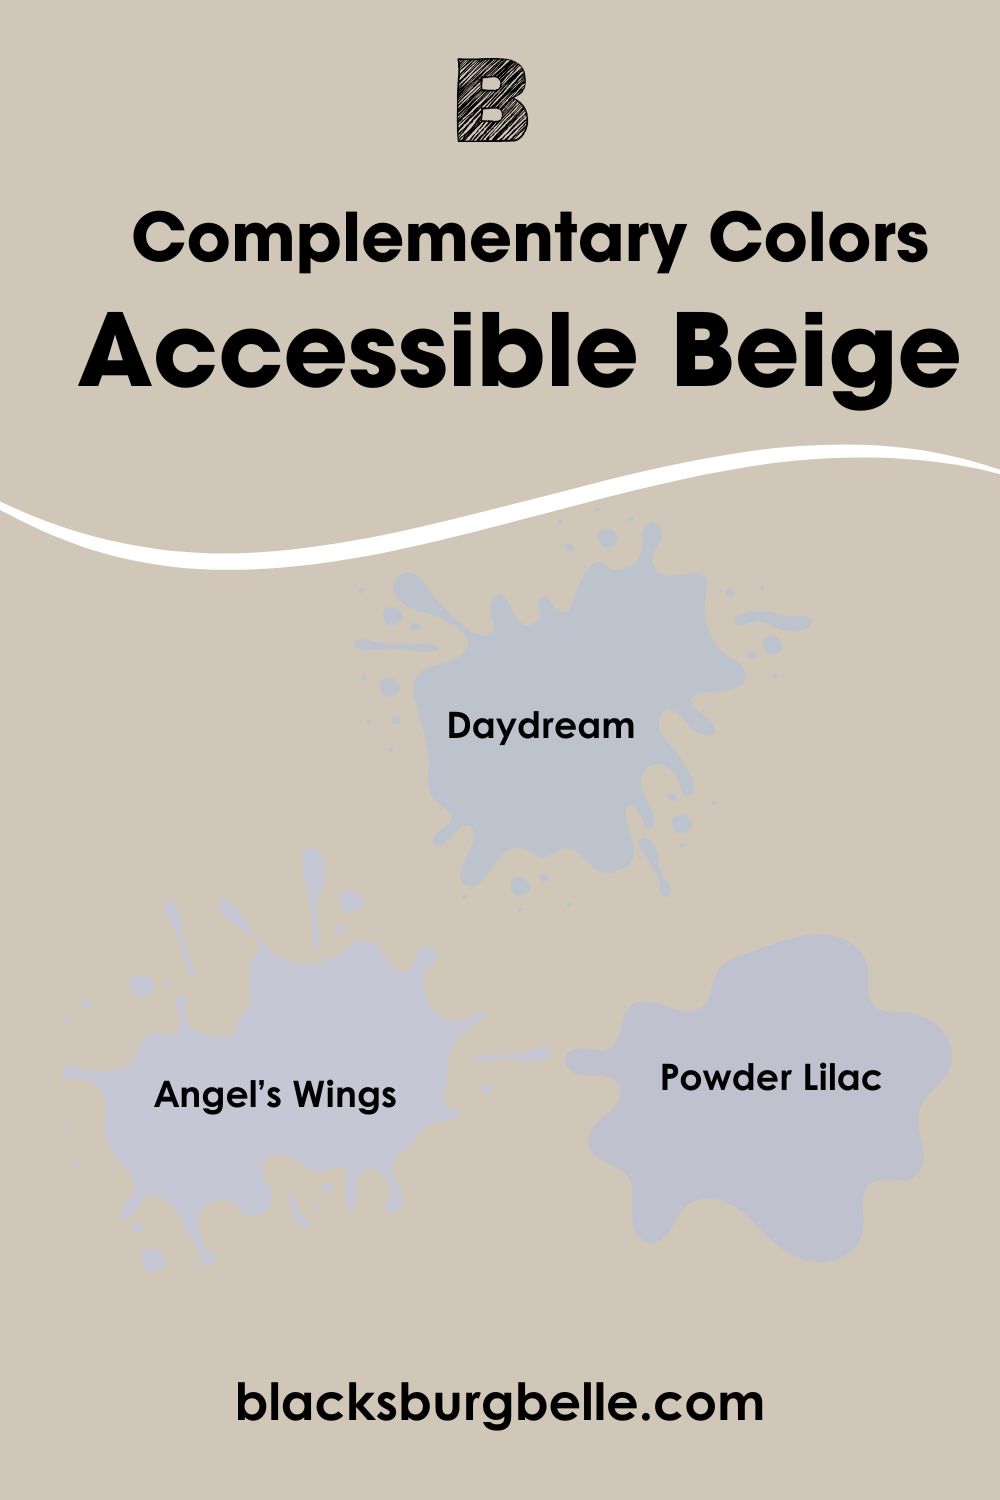 Accessible Beige Complementary Colors